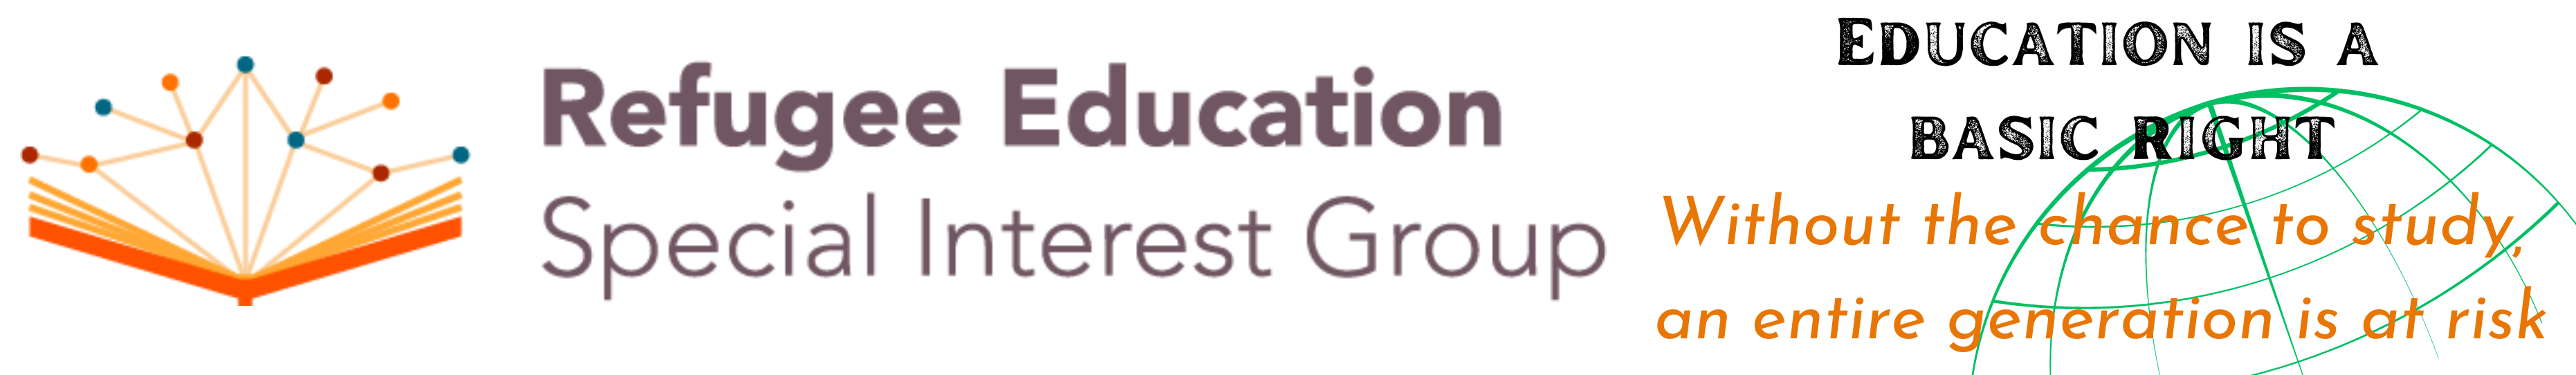 Refugee Education Special Interest Group